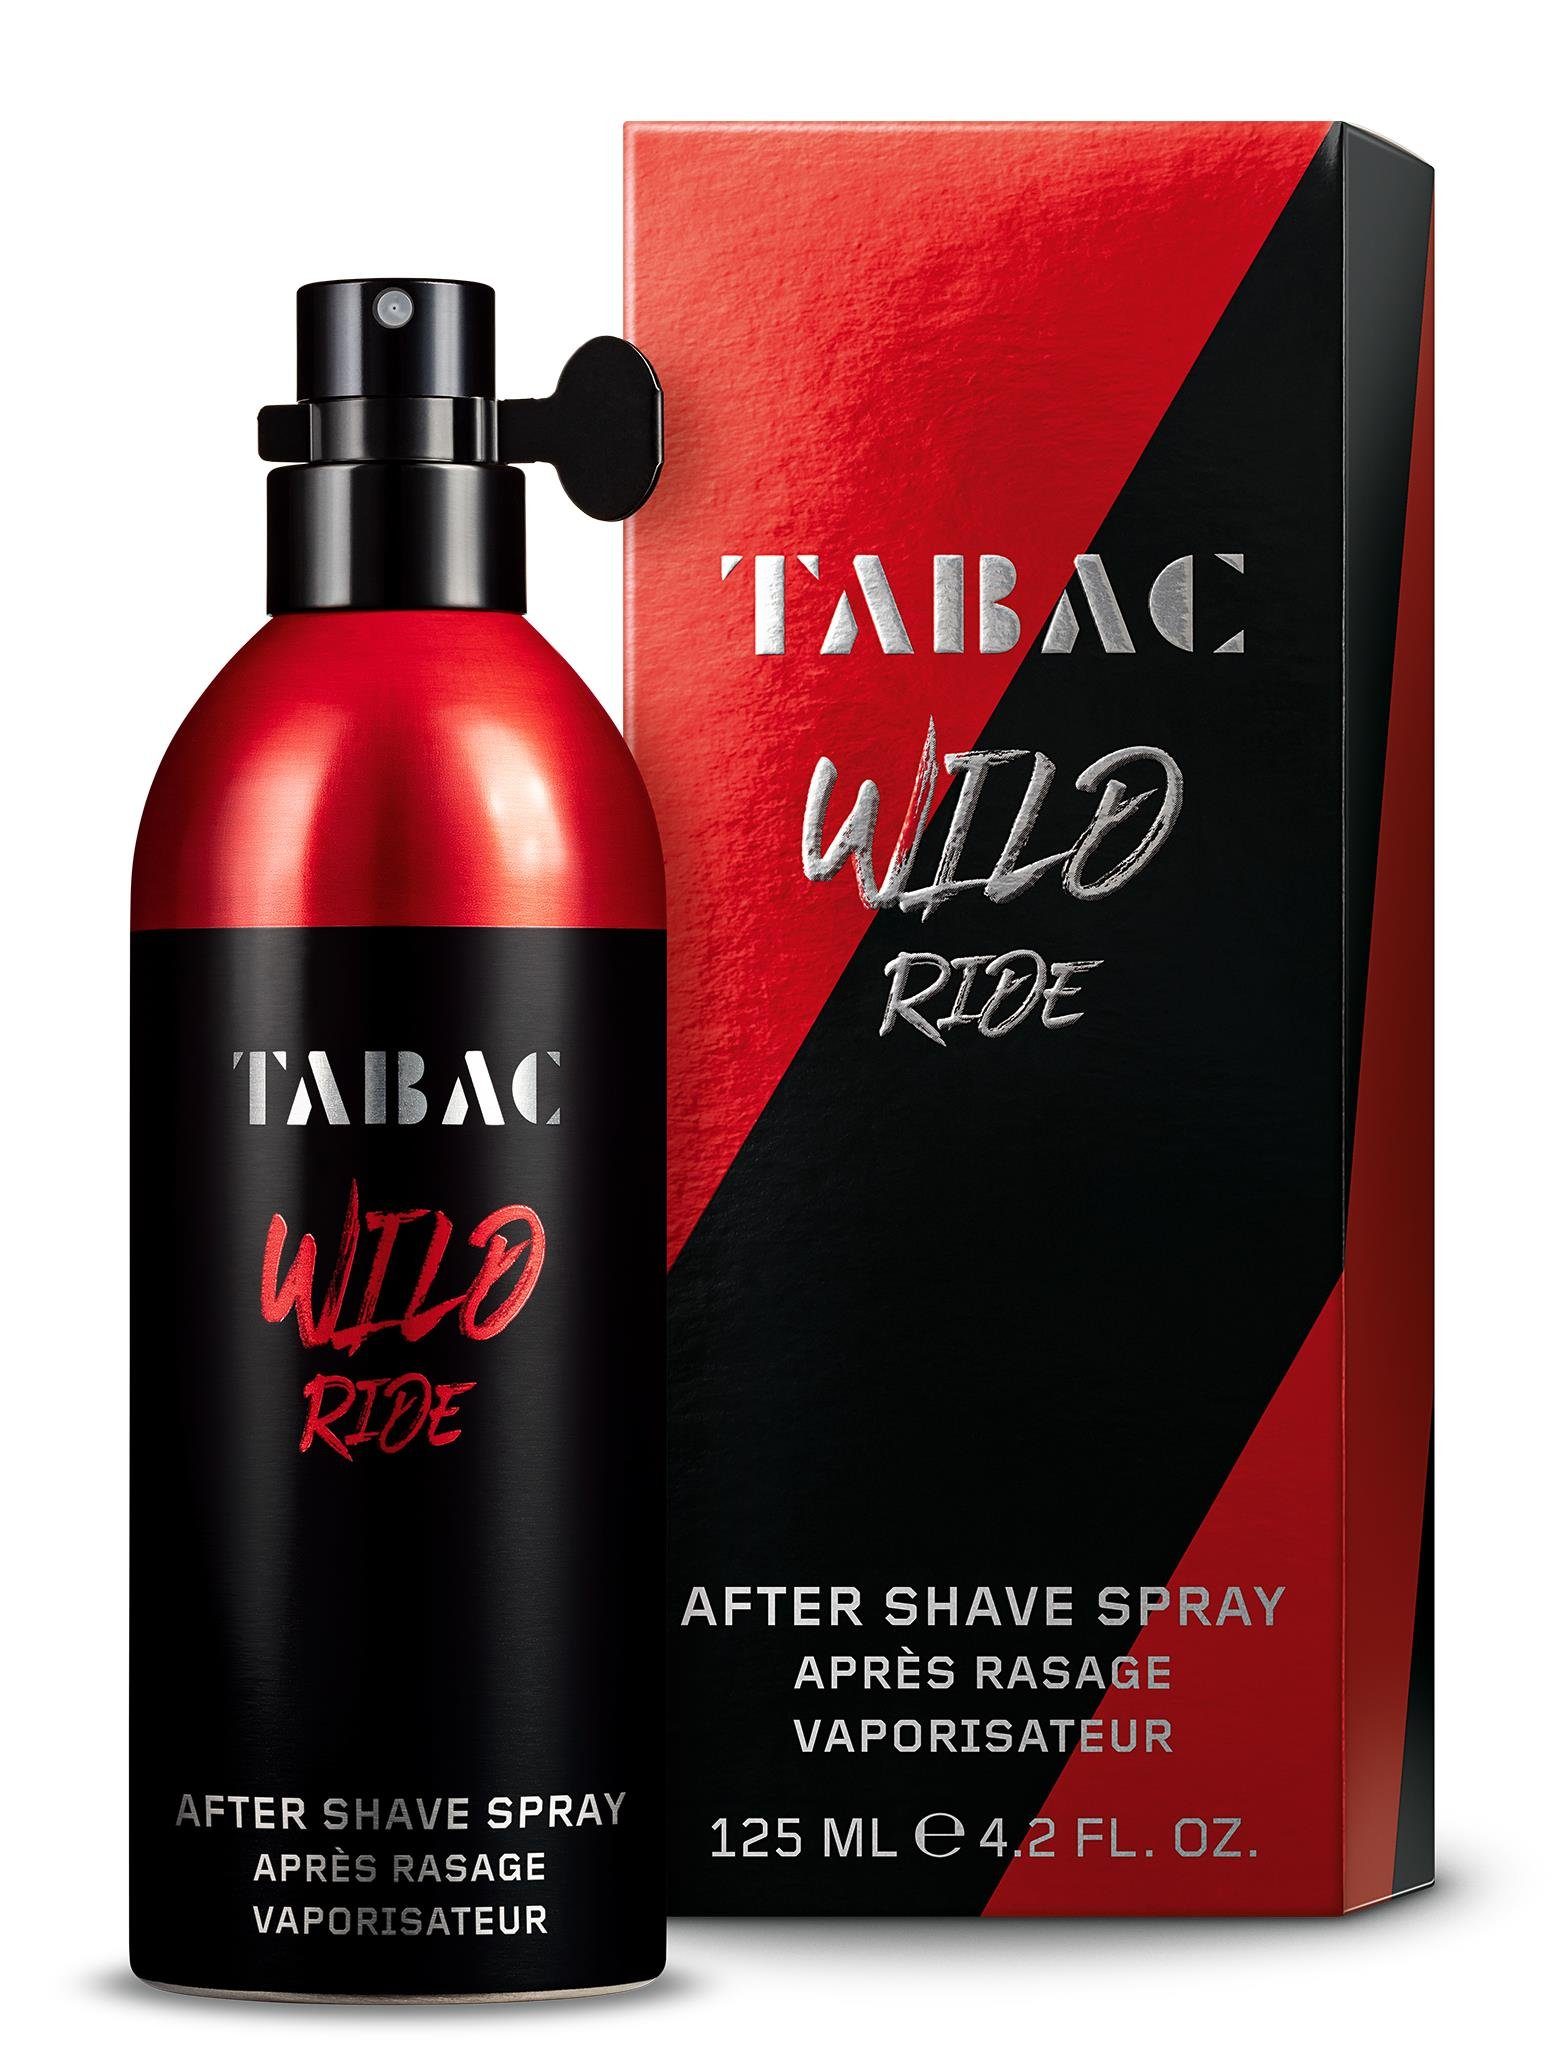 Tabac Wild Ride Gesichts-Reinigungslotion Tabac Wild Ride After Shave Lotion 125 ml